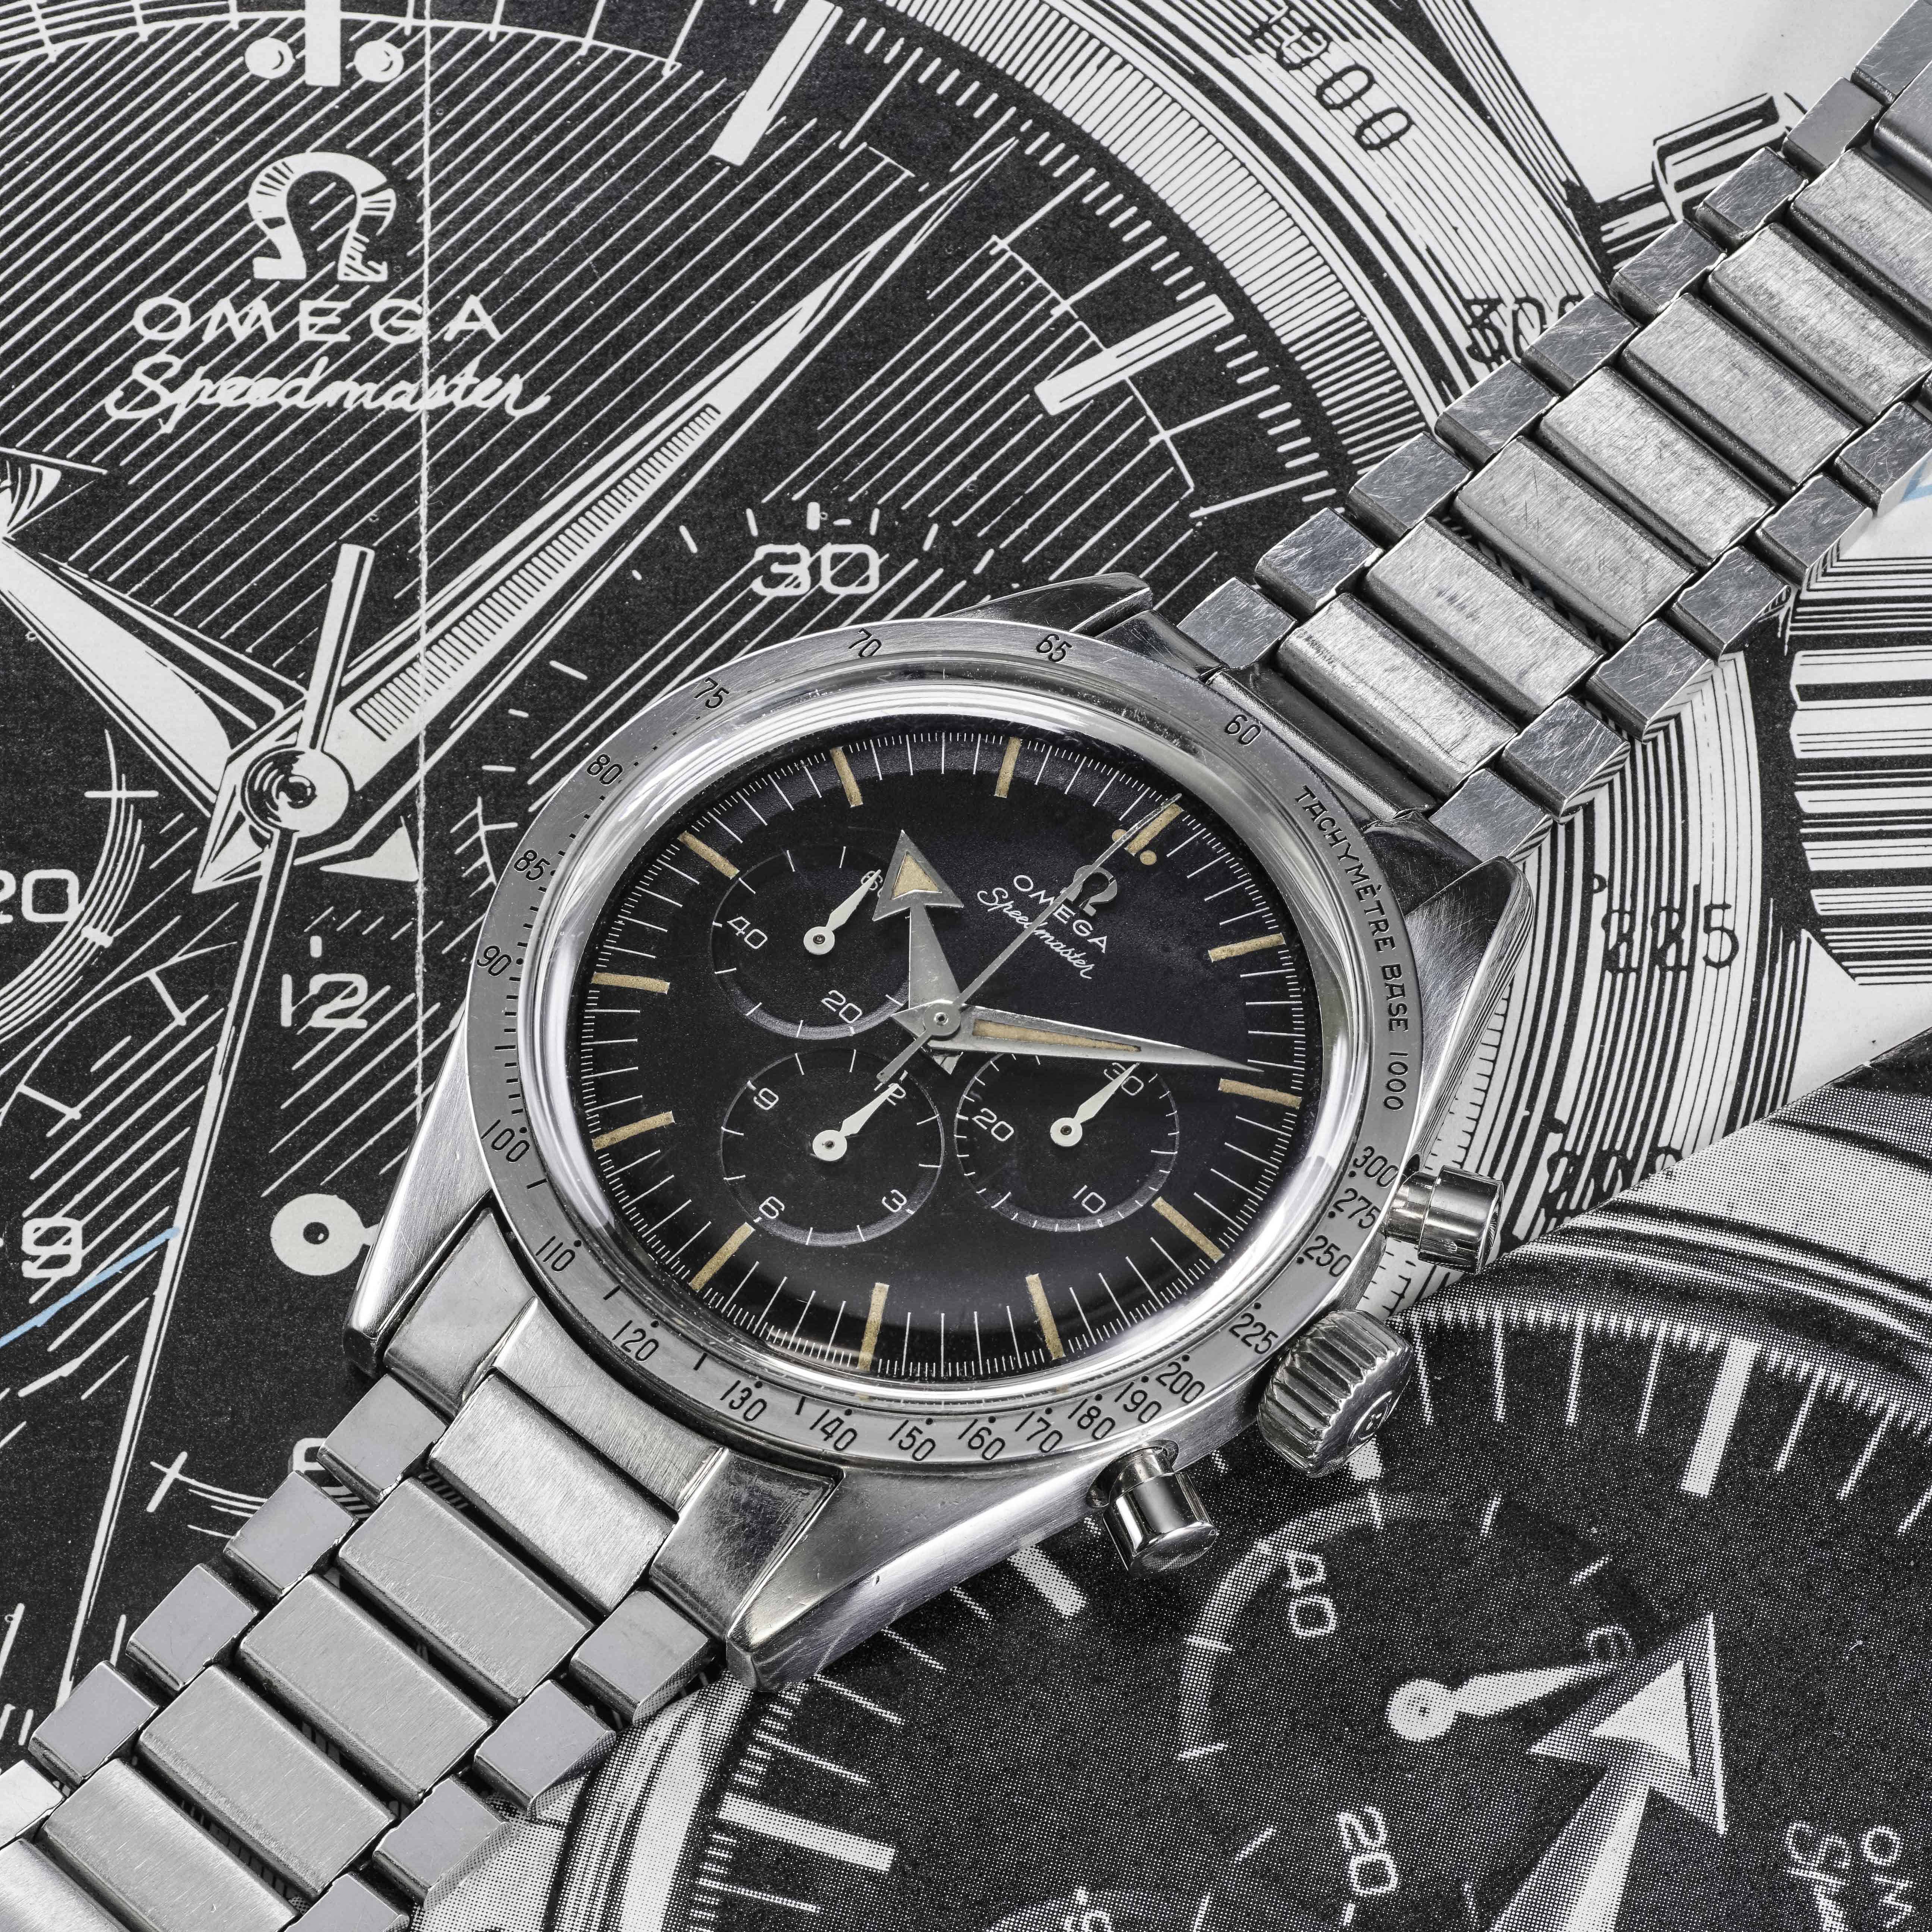 most expensive omega watch